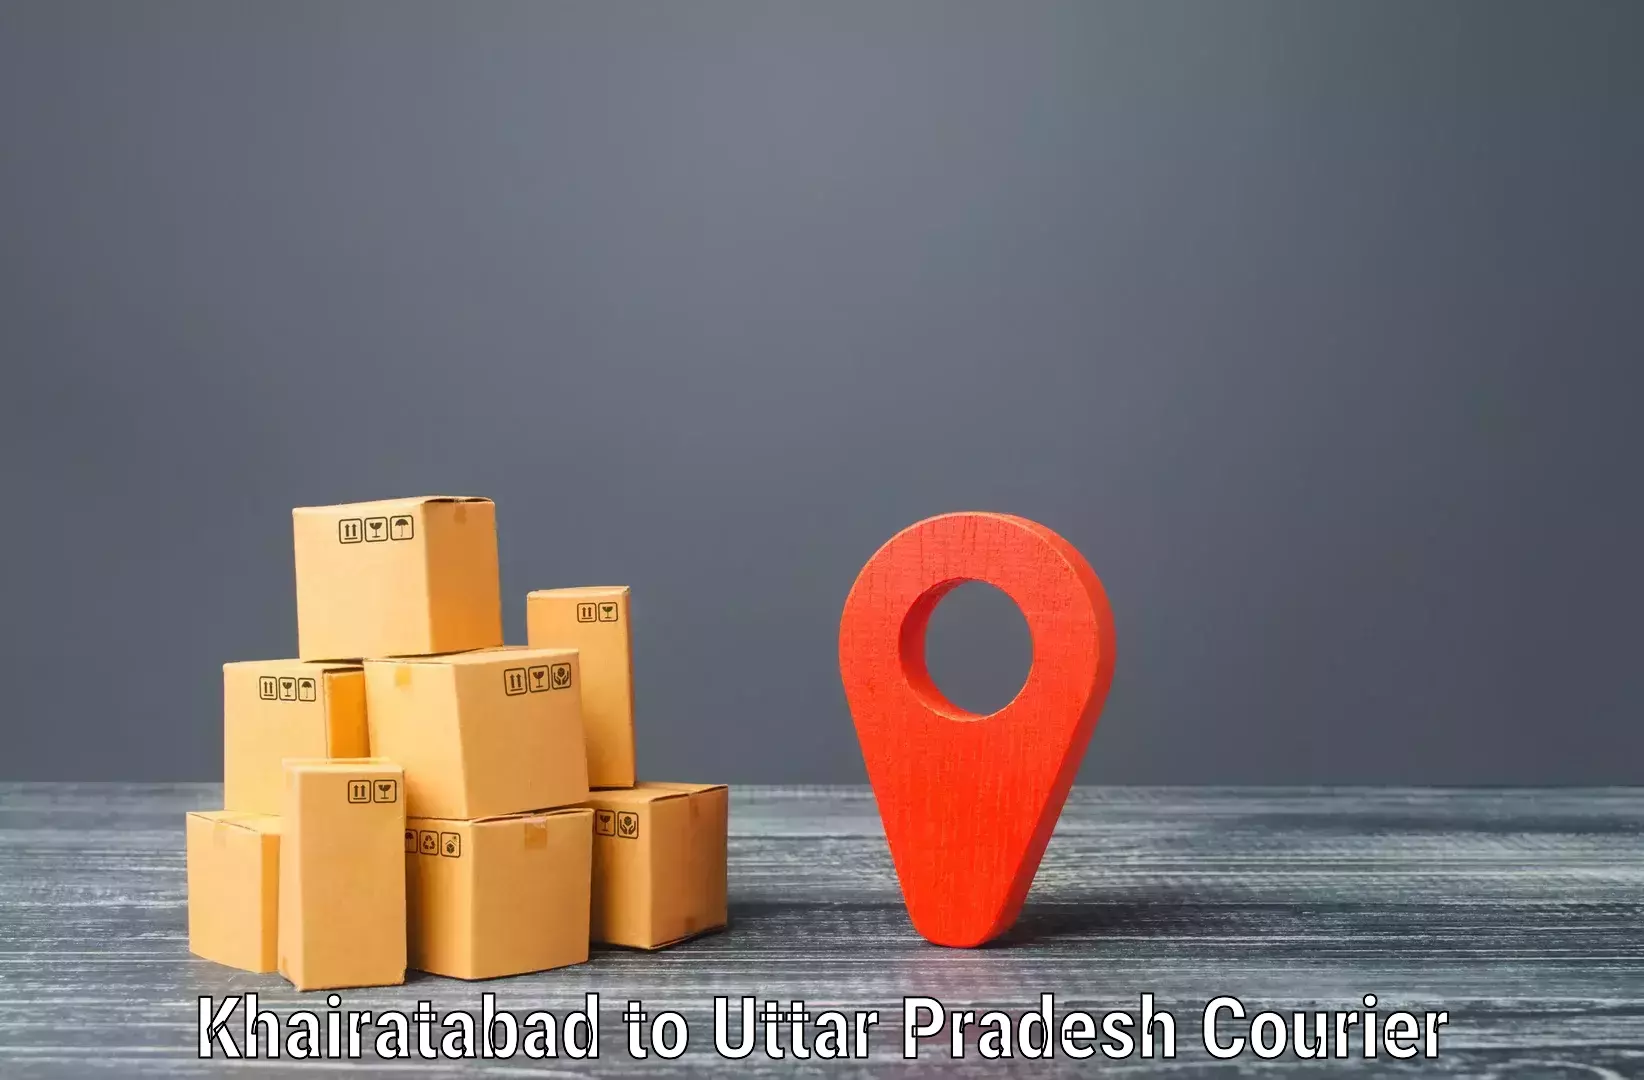 Bulk courier orders Khairatabad to Baghpat